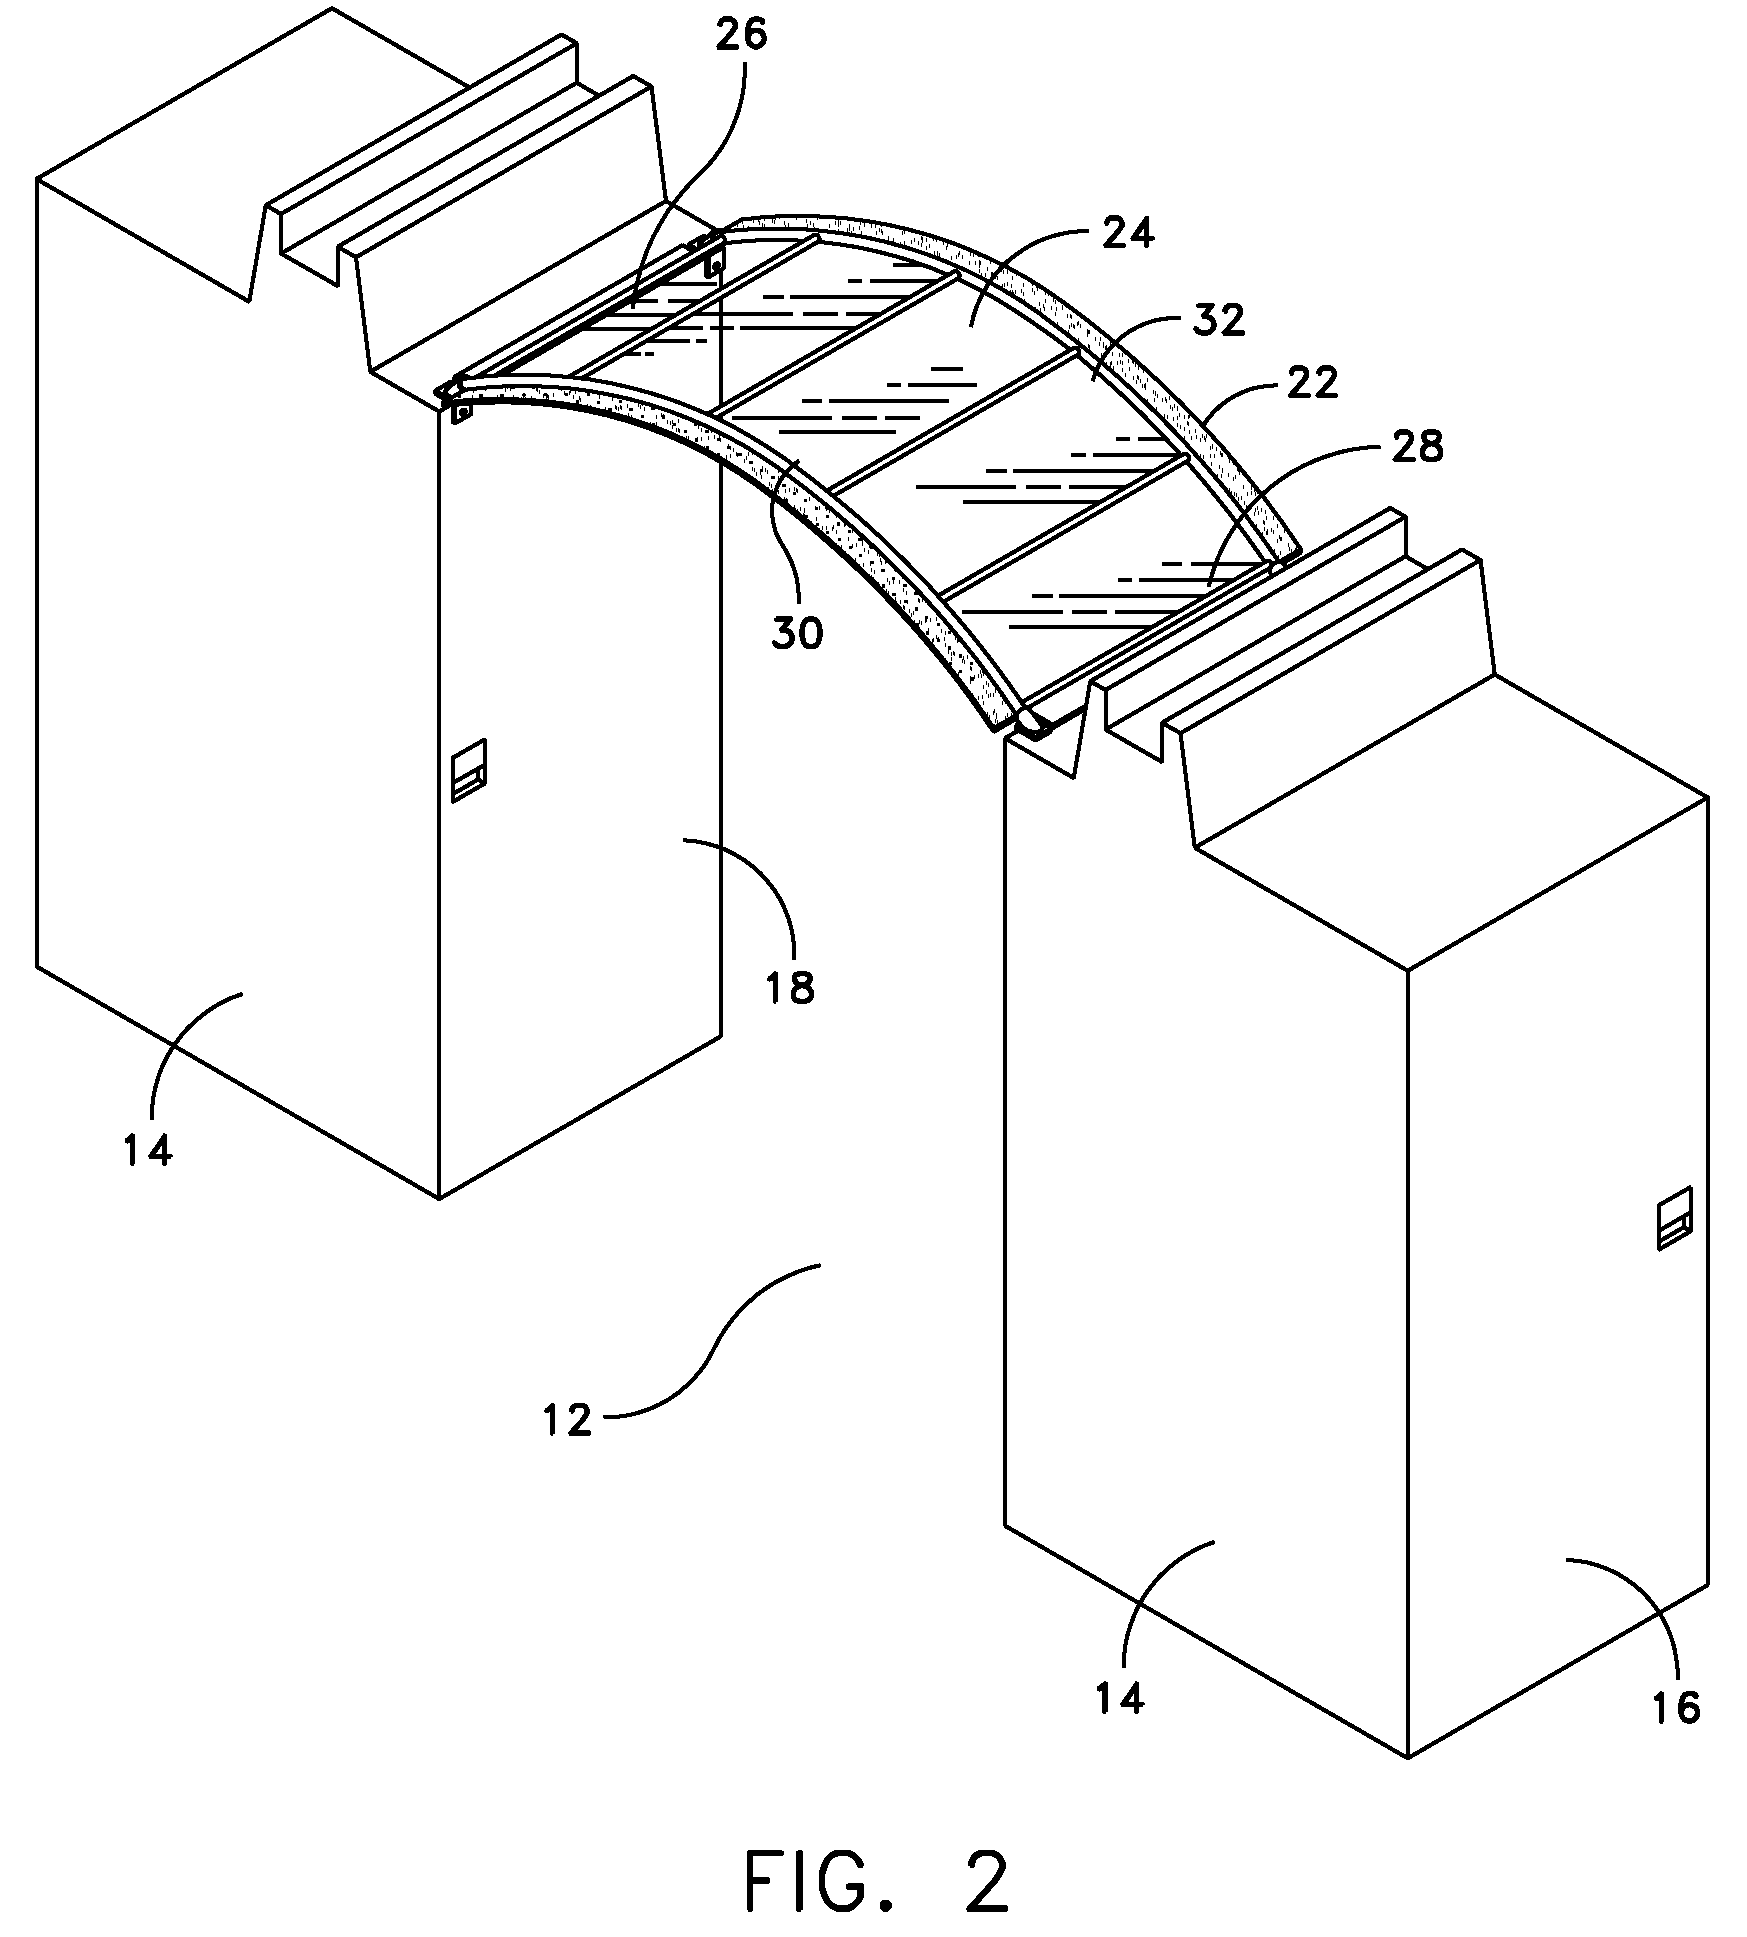 Hot aisle containment panel system and method